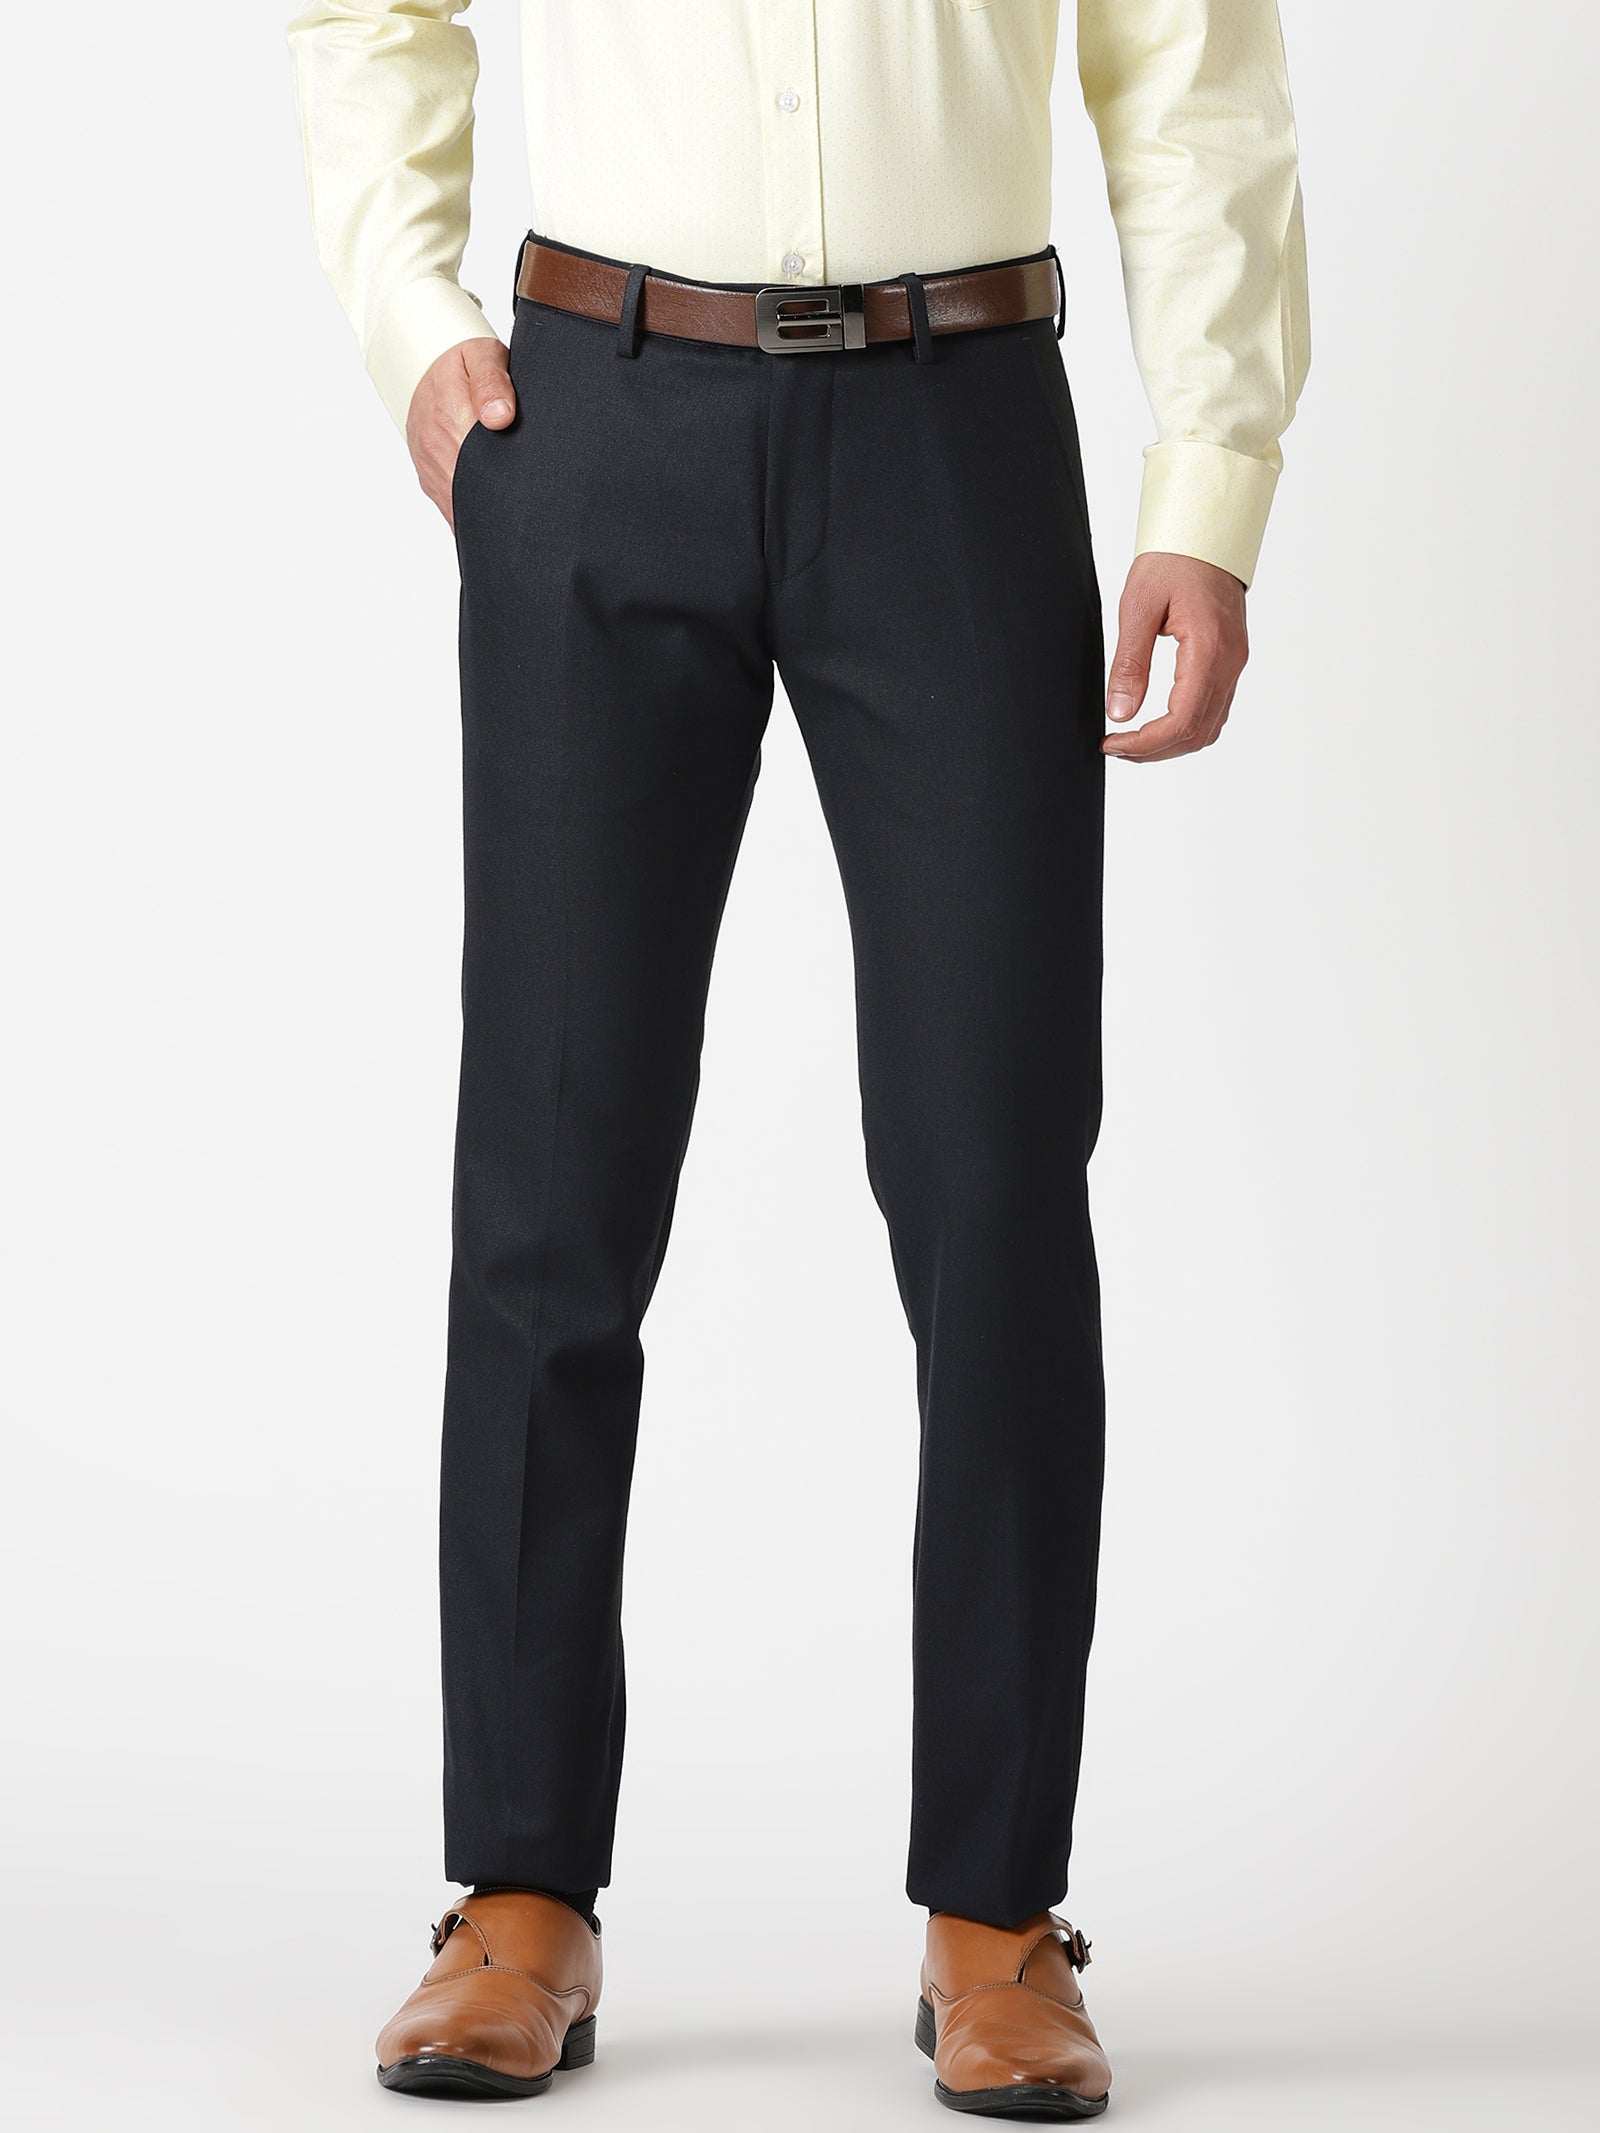 MCo Navy Blue Stretch Tapered Trousers  MCo